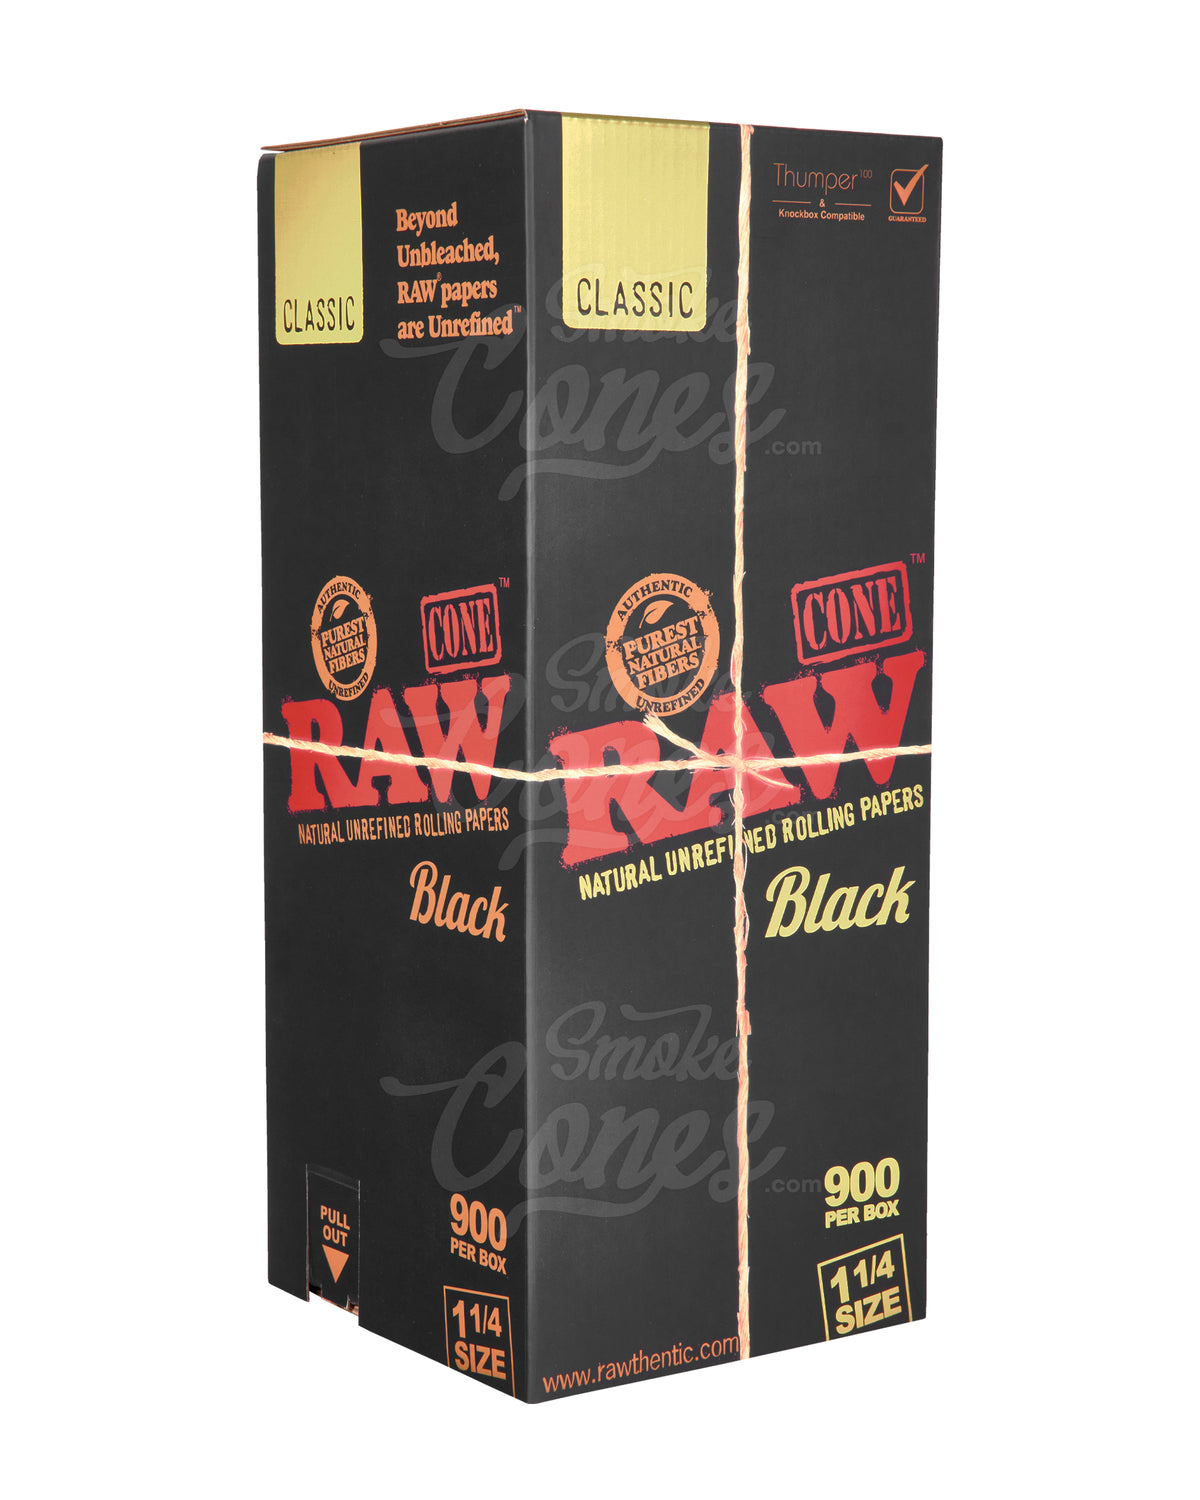 RAW Black Classic 1 1/4 Size 84mm Pre Rolled Unbleached Paper Cones 900/Box - 1